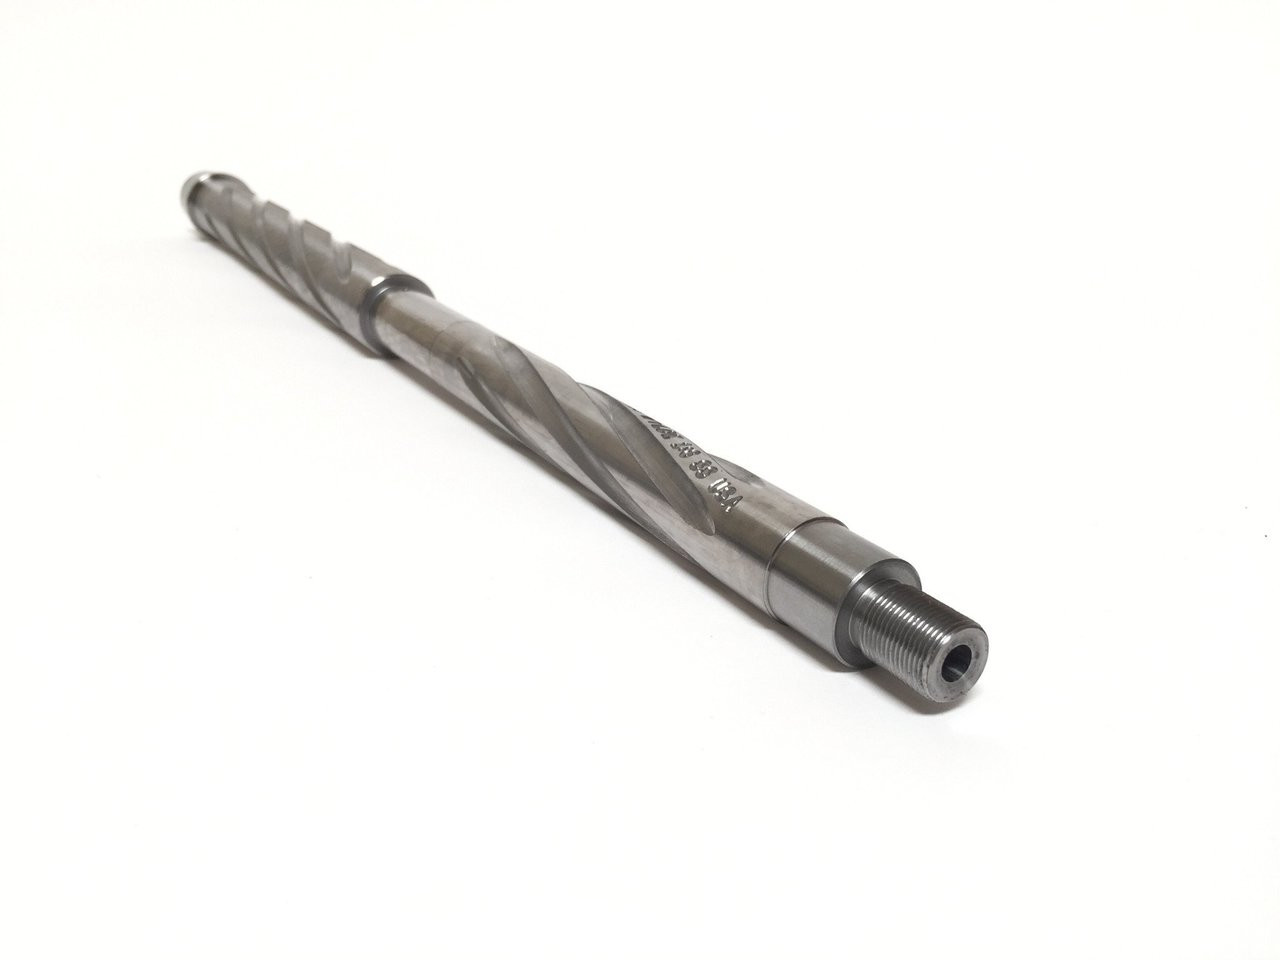 18" .223 WYLDE Stainless Spiral Fluted 1:8 Mid-Length Heavy Barrel